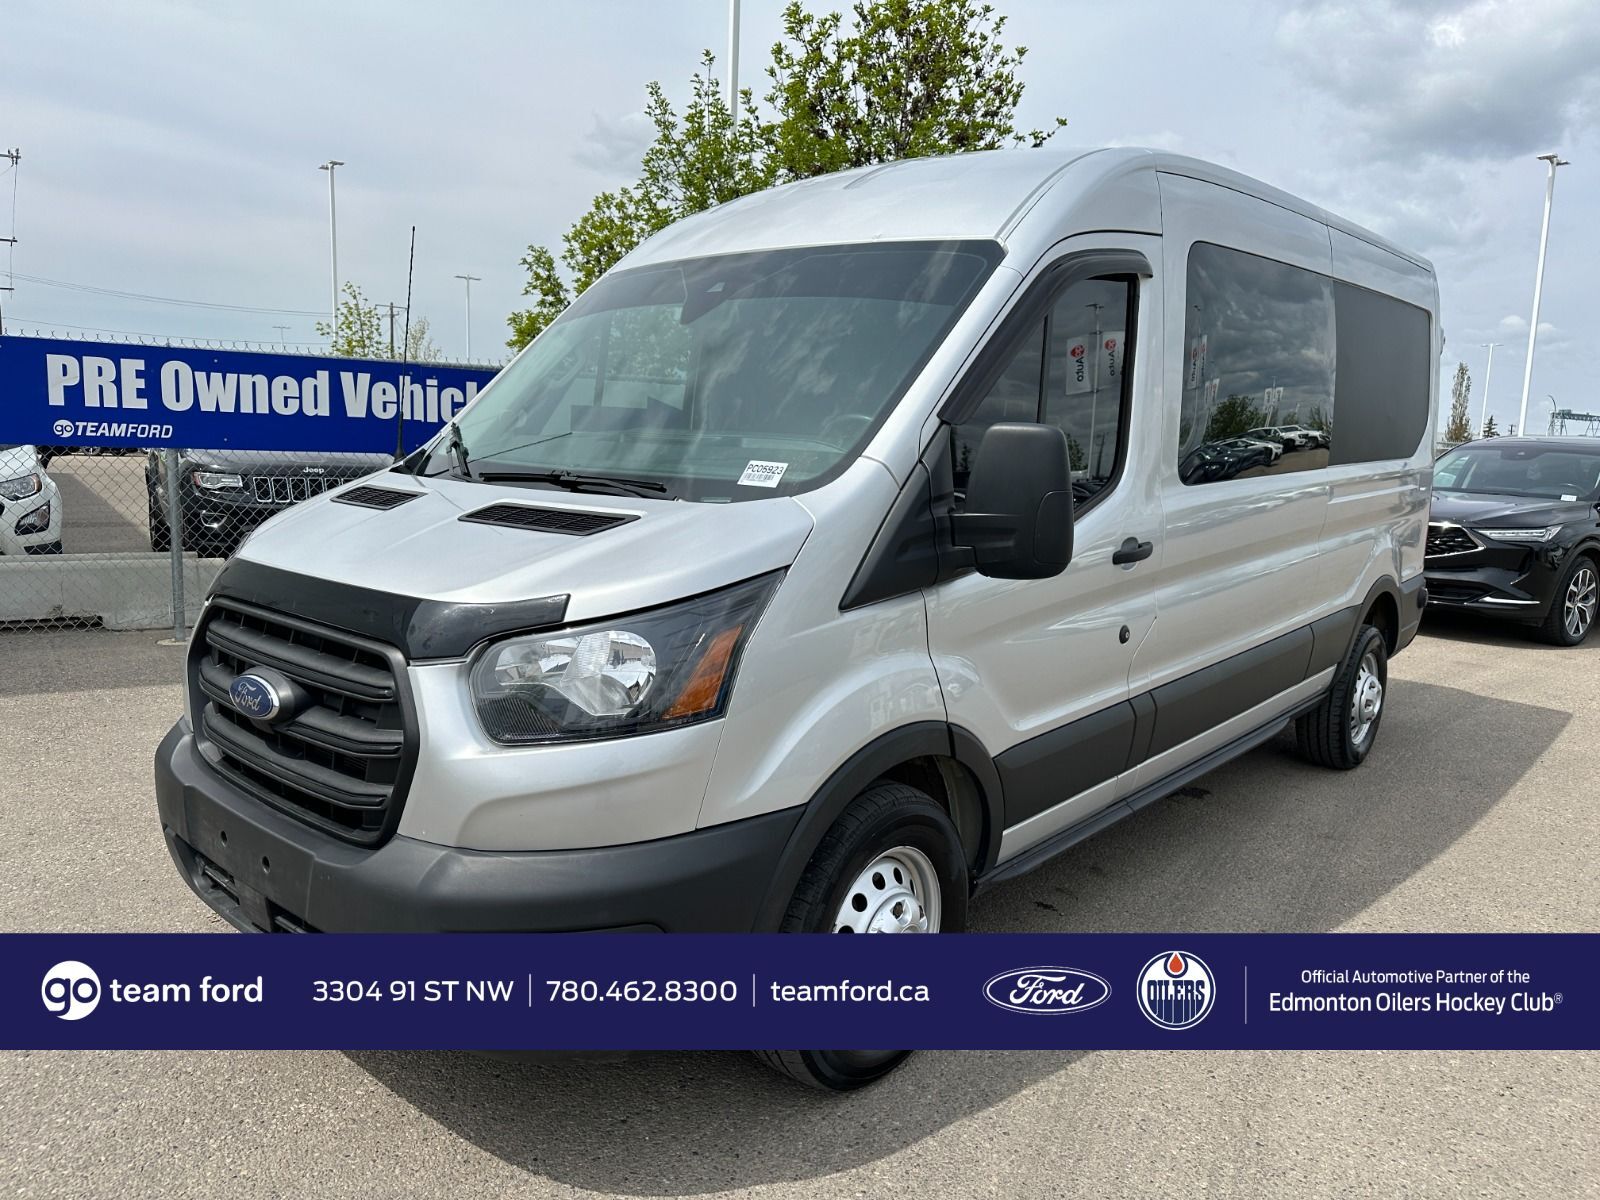 2020 Ford Transit Crew Van 3.5L V6 ECOBOOST ENG, CRUISE CONTROL, REVERSE CAME